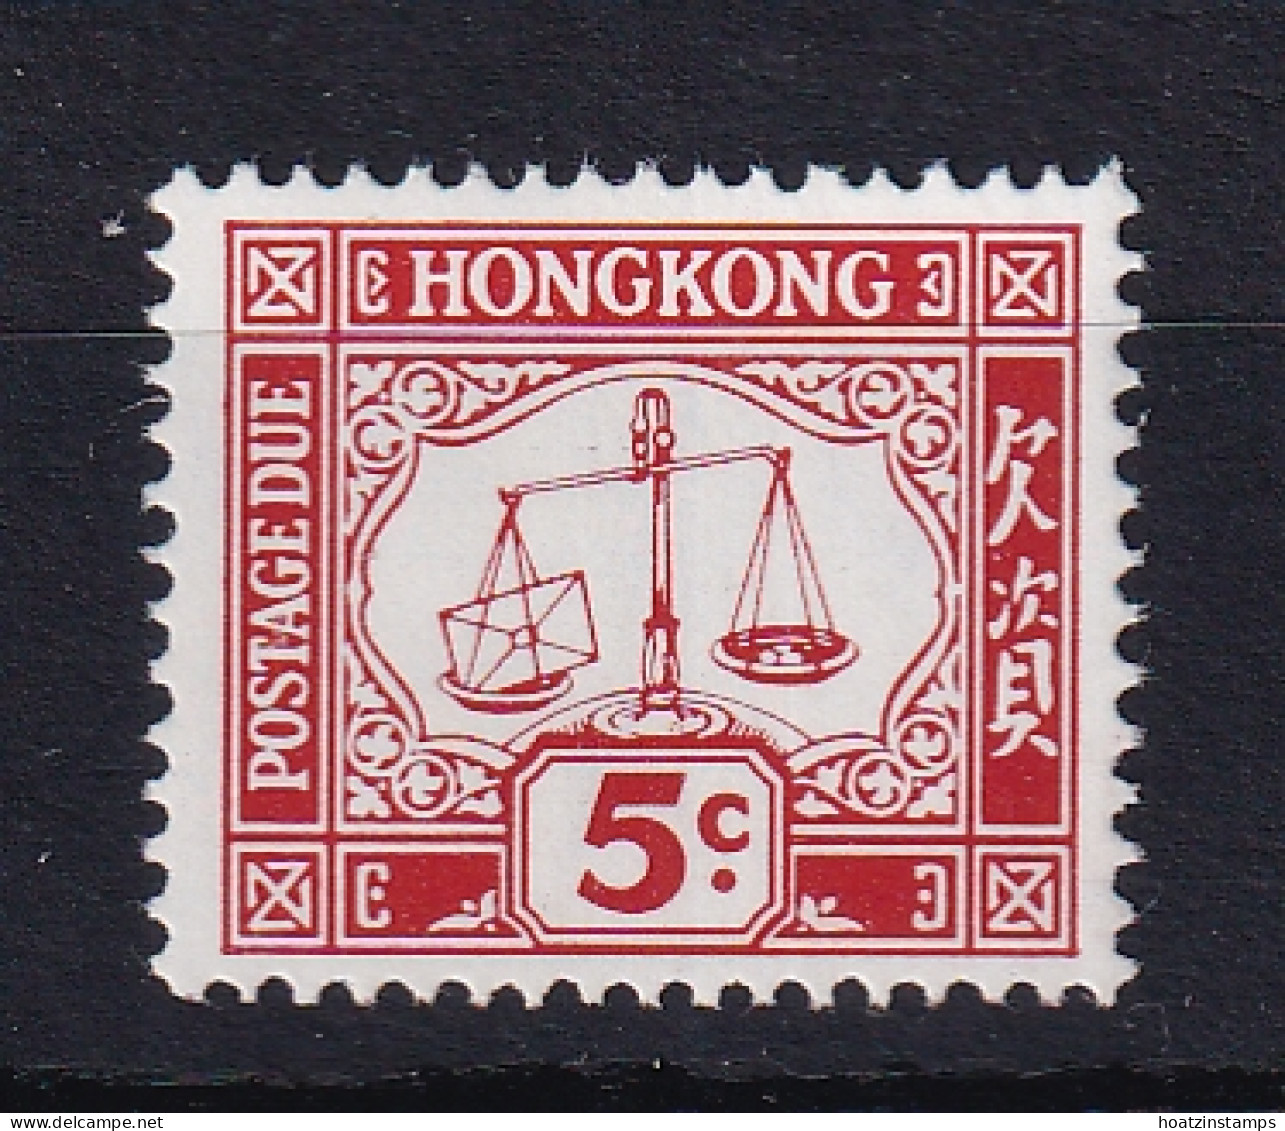 Hong Kong: 1965/72   Postage Due     SG D14      5c       MNH - Postage Due